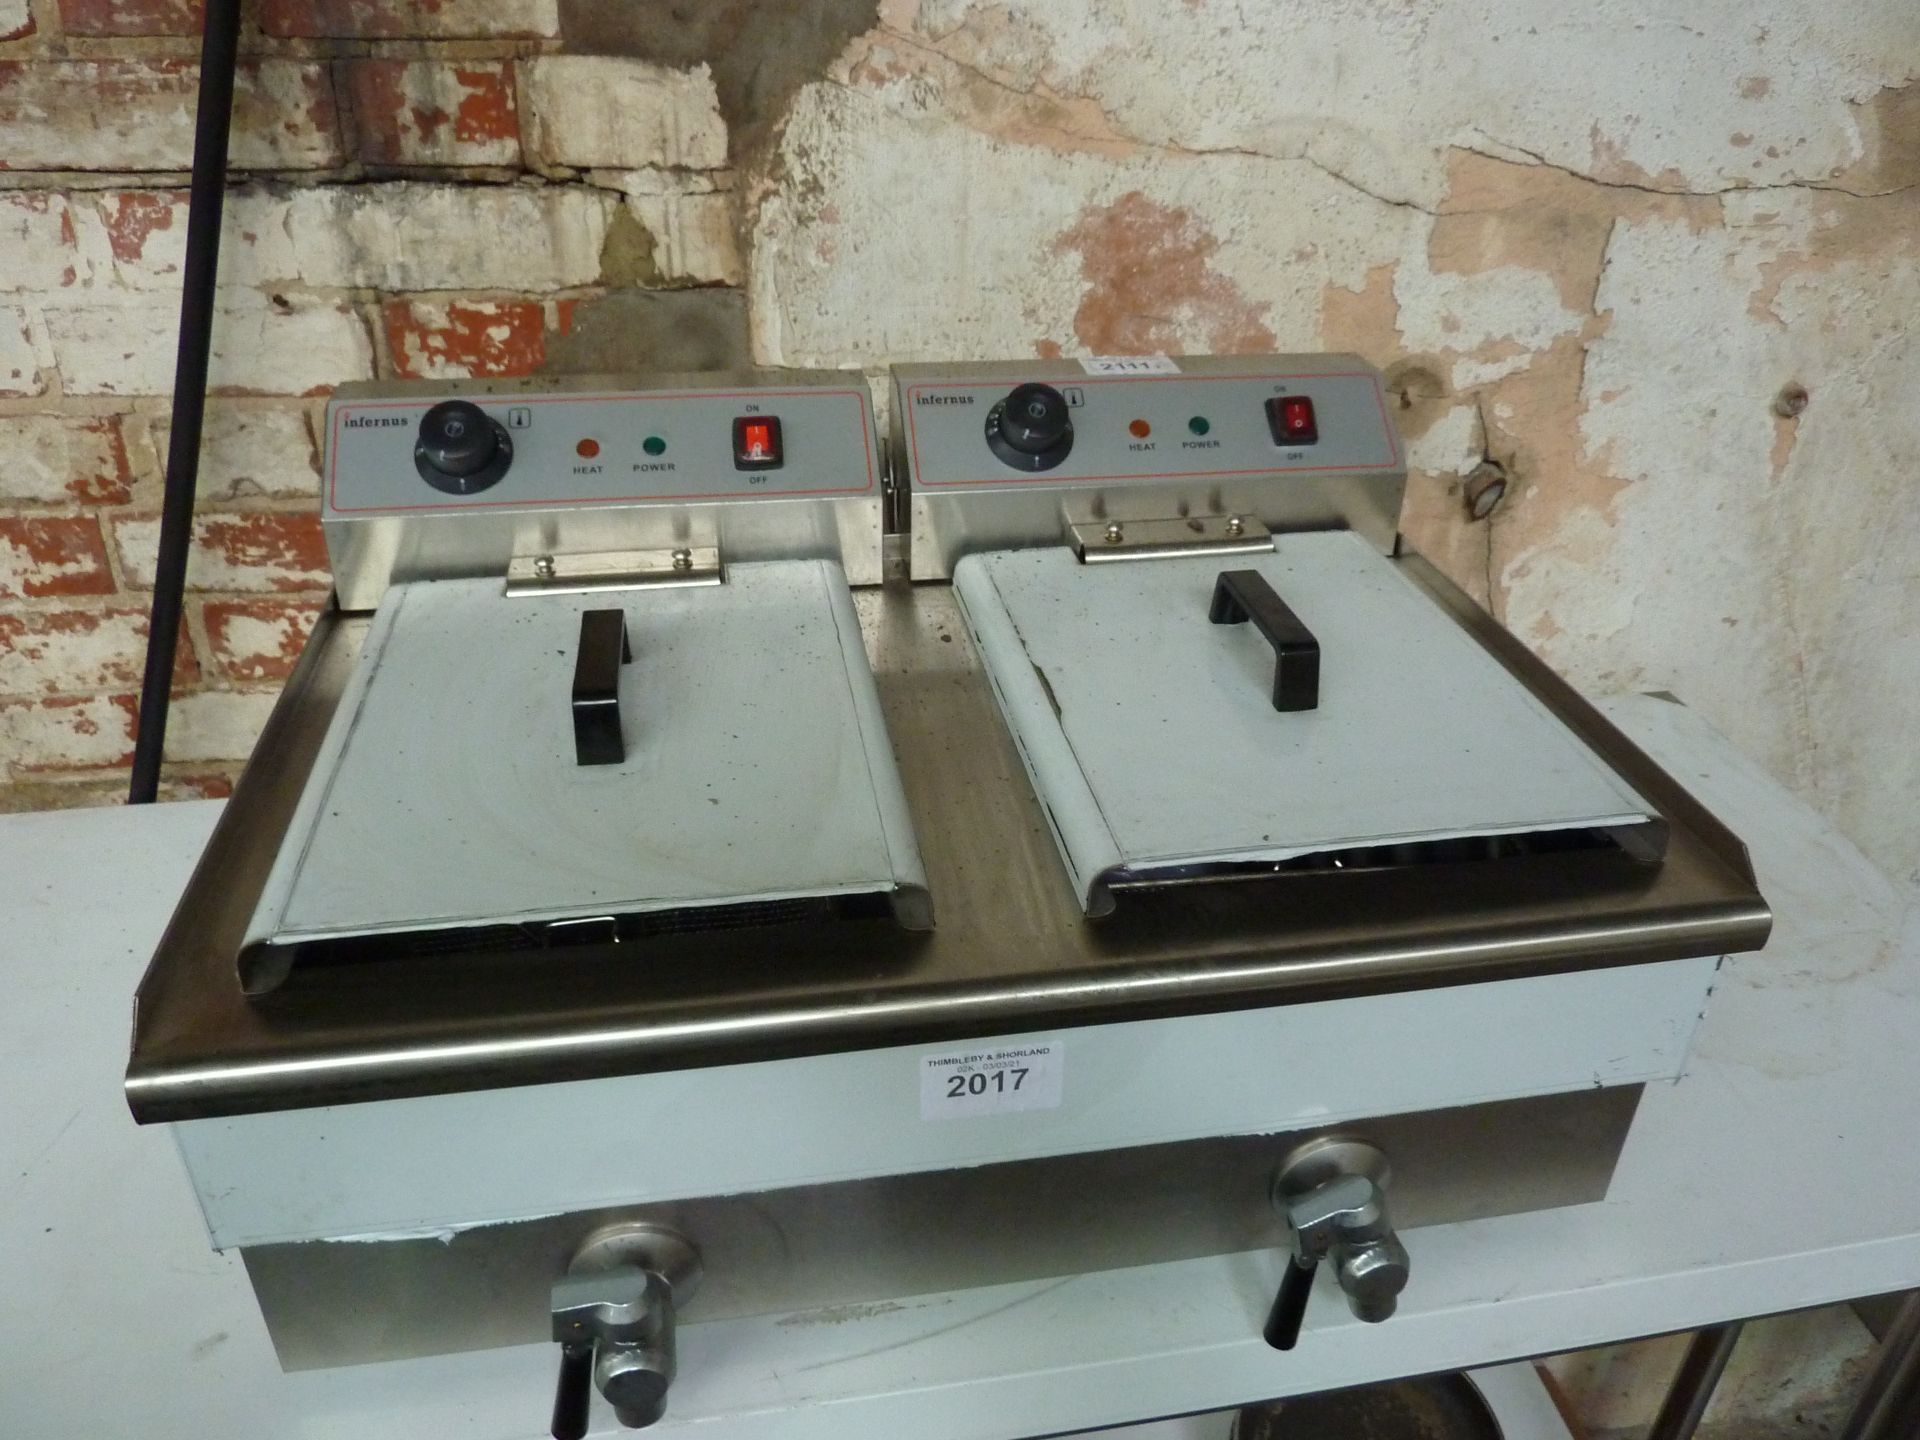 Infernus double tank electric fryer with front drain valves